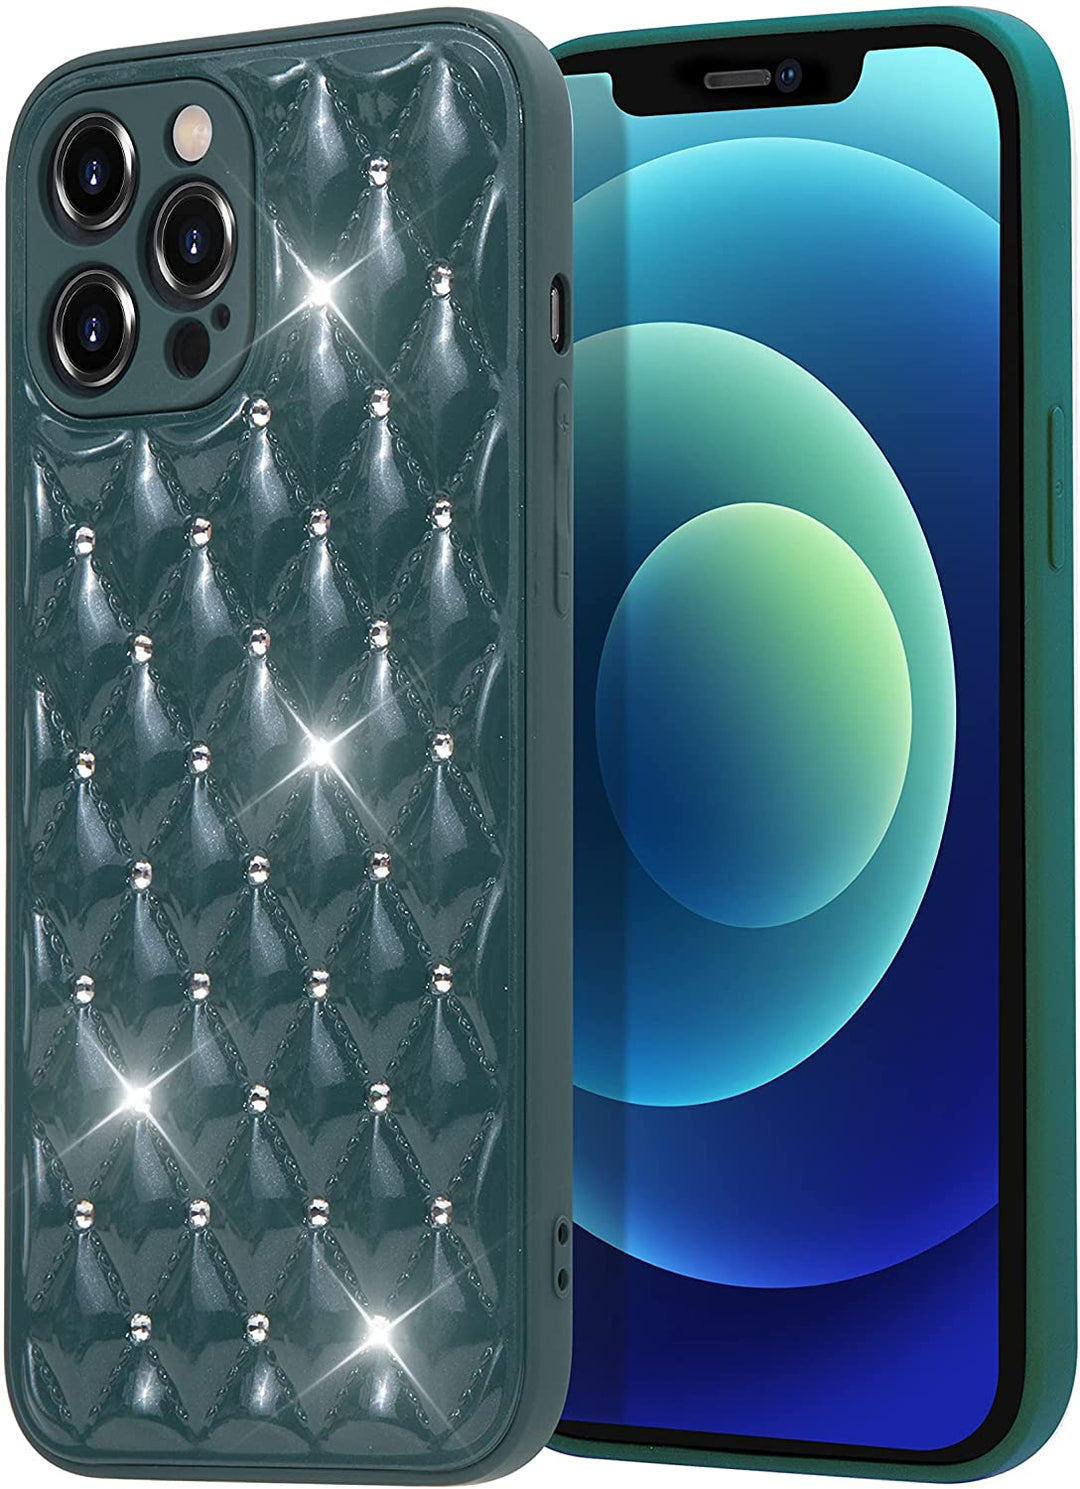 An alpine-green, glossy, TPU, iPhone 12 Pro Max case. The back is designed with interlocking diamond patterns. At each intersection of the diamonds are studded with faux diamonds. #color_green